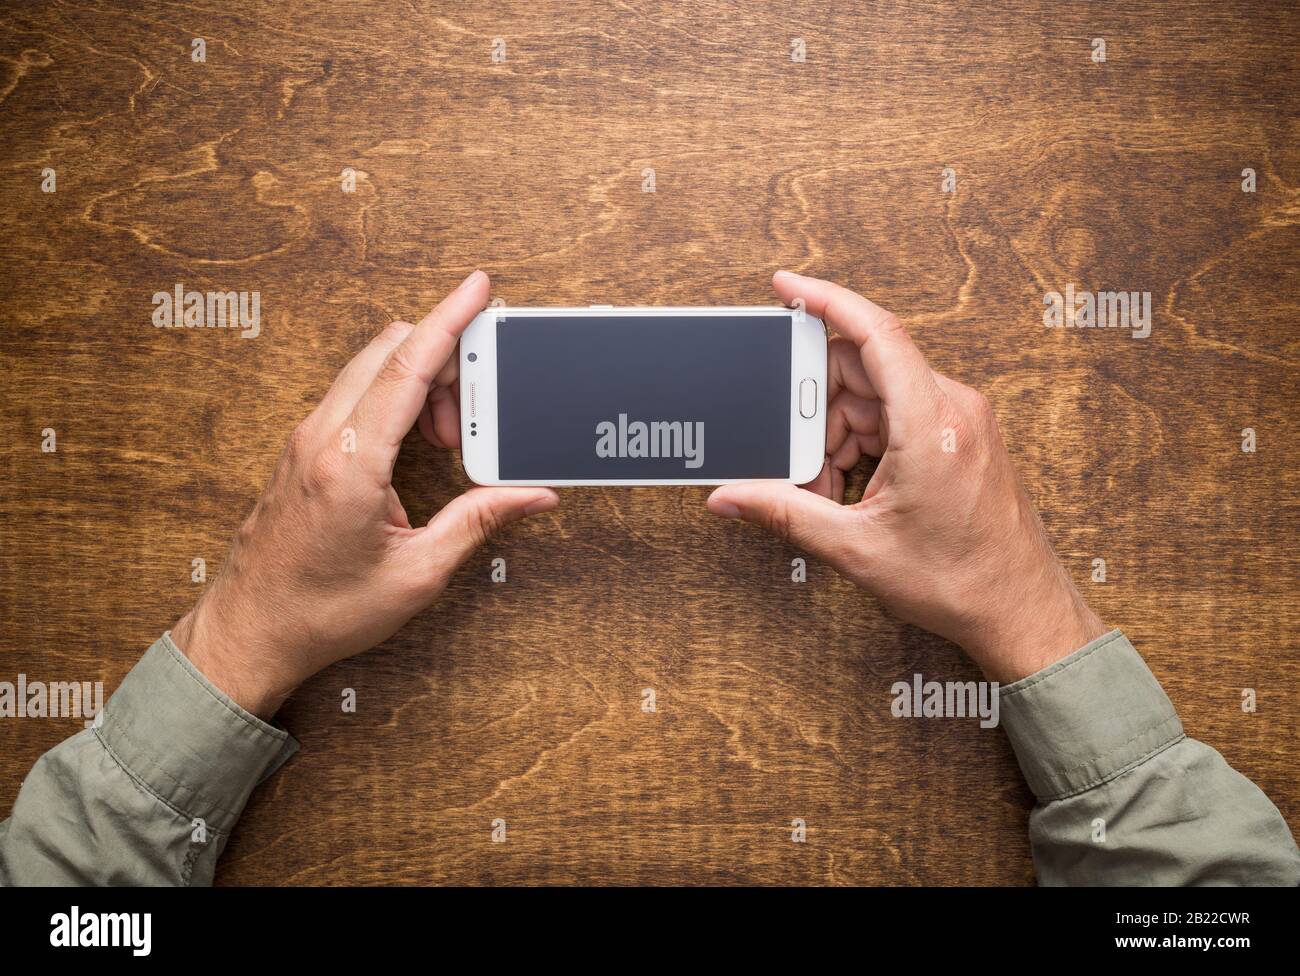 Man's hands on the table holding smart phone. Stock Photo